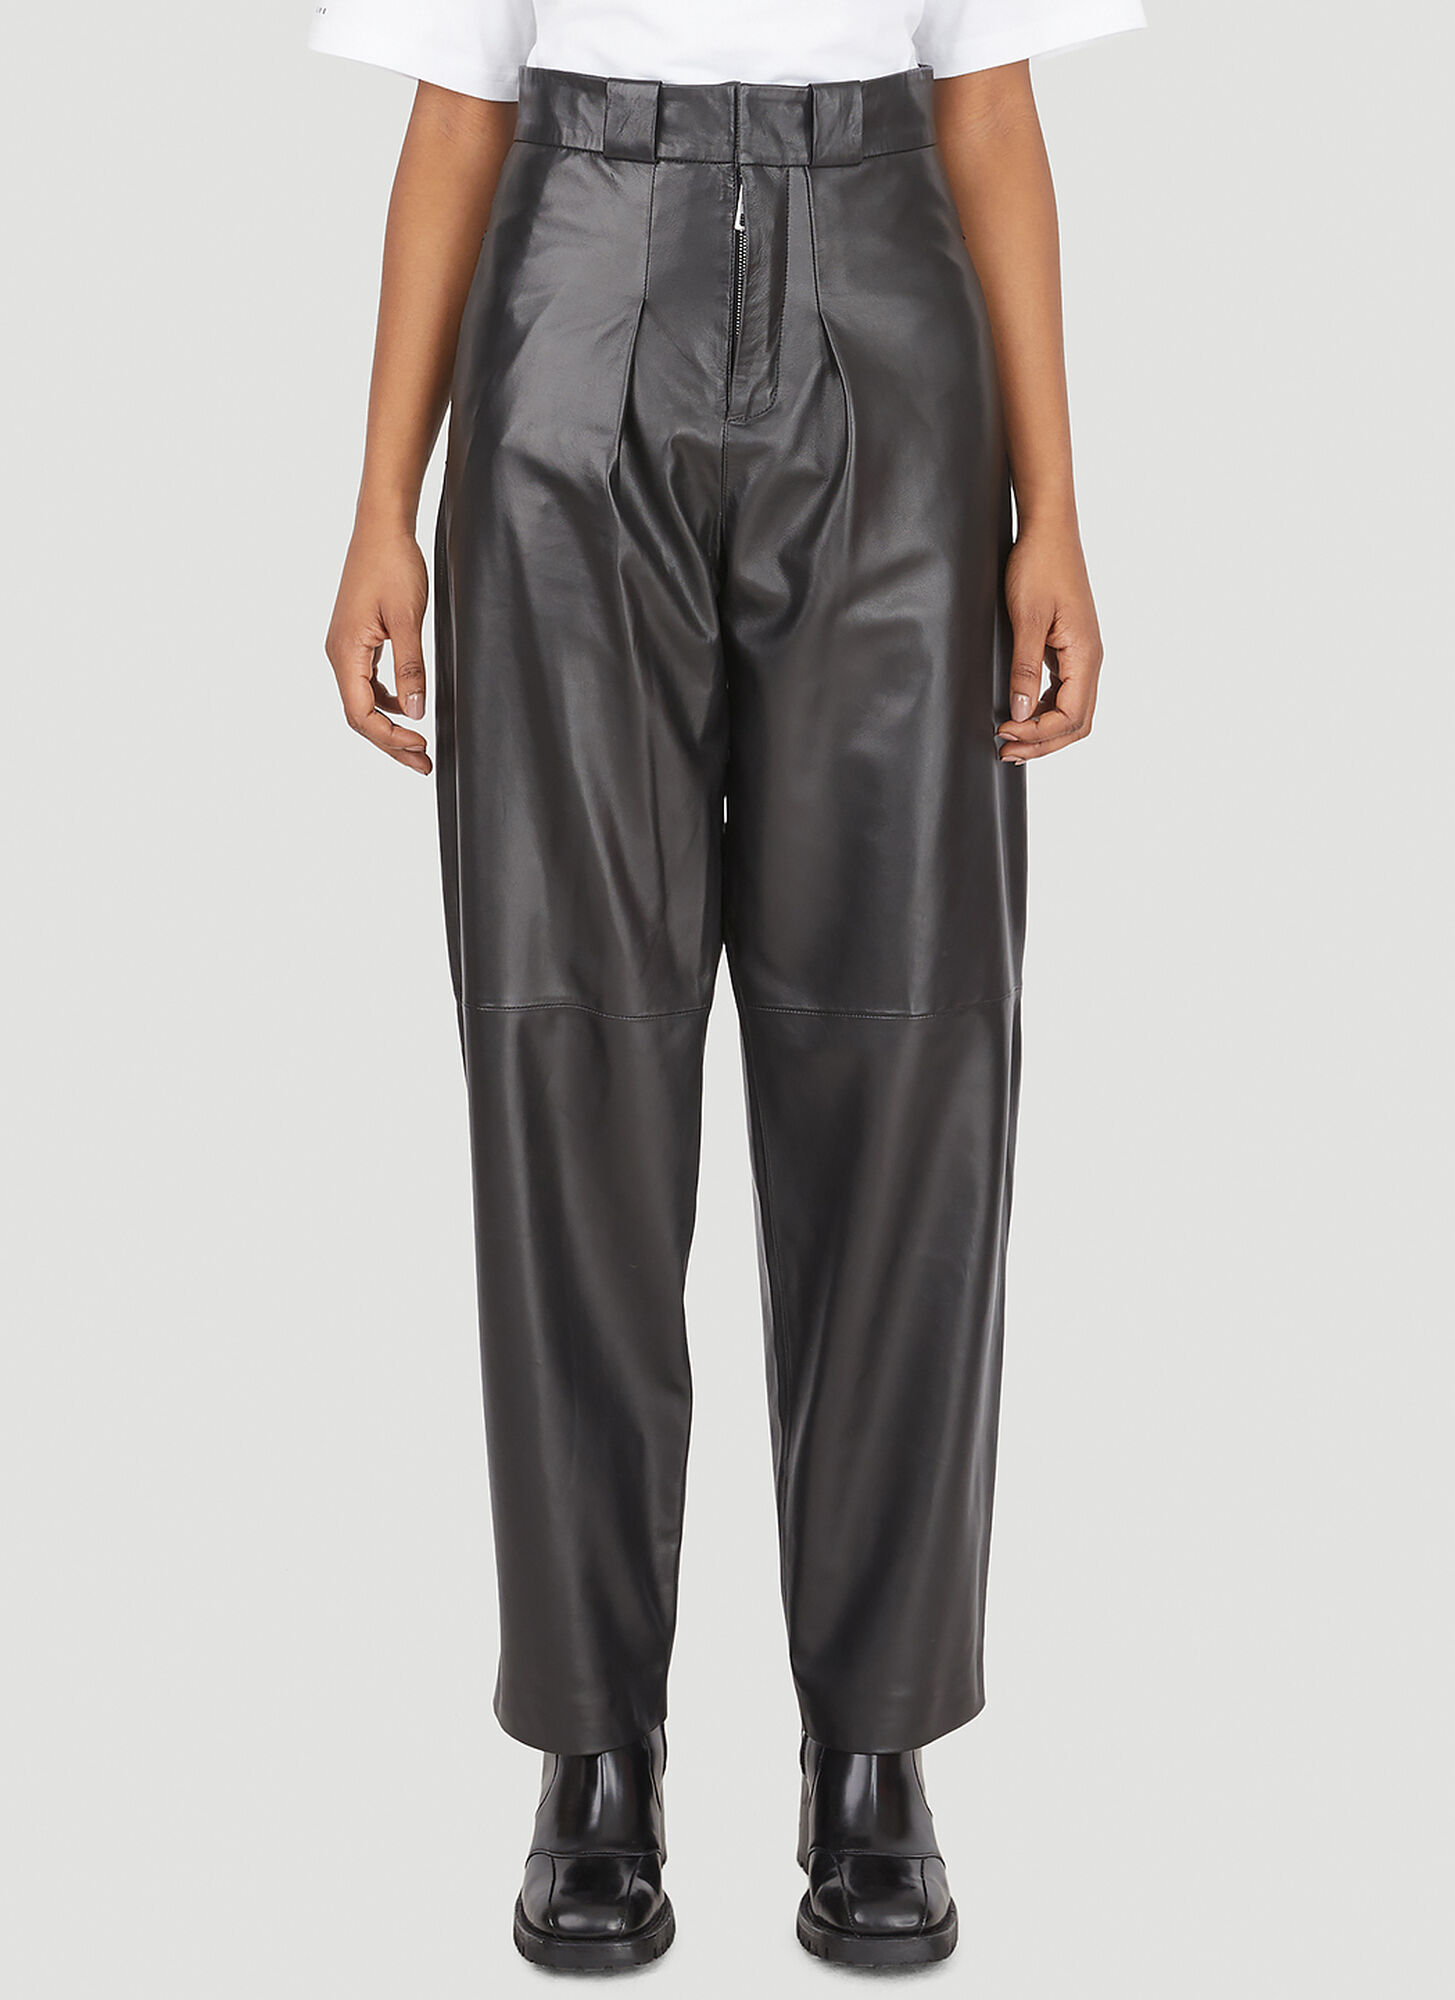 Common Leisure Chiller Trousers In Black